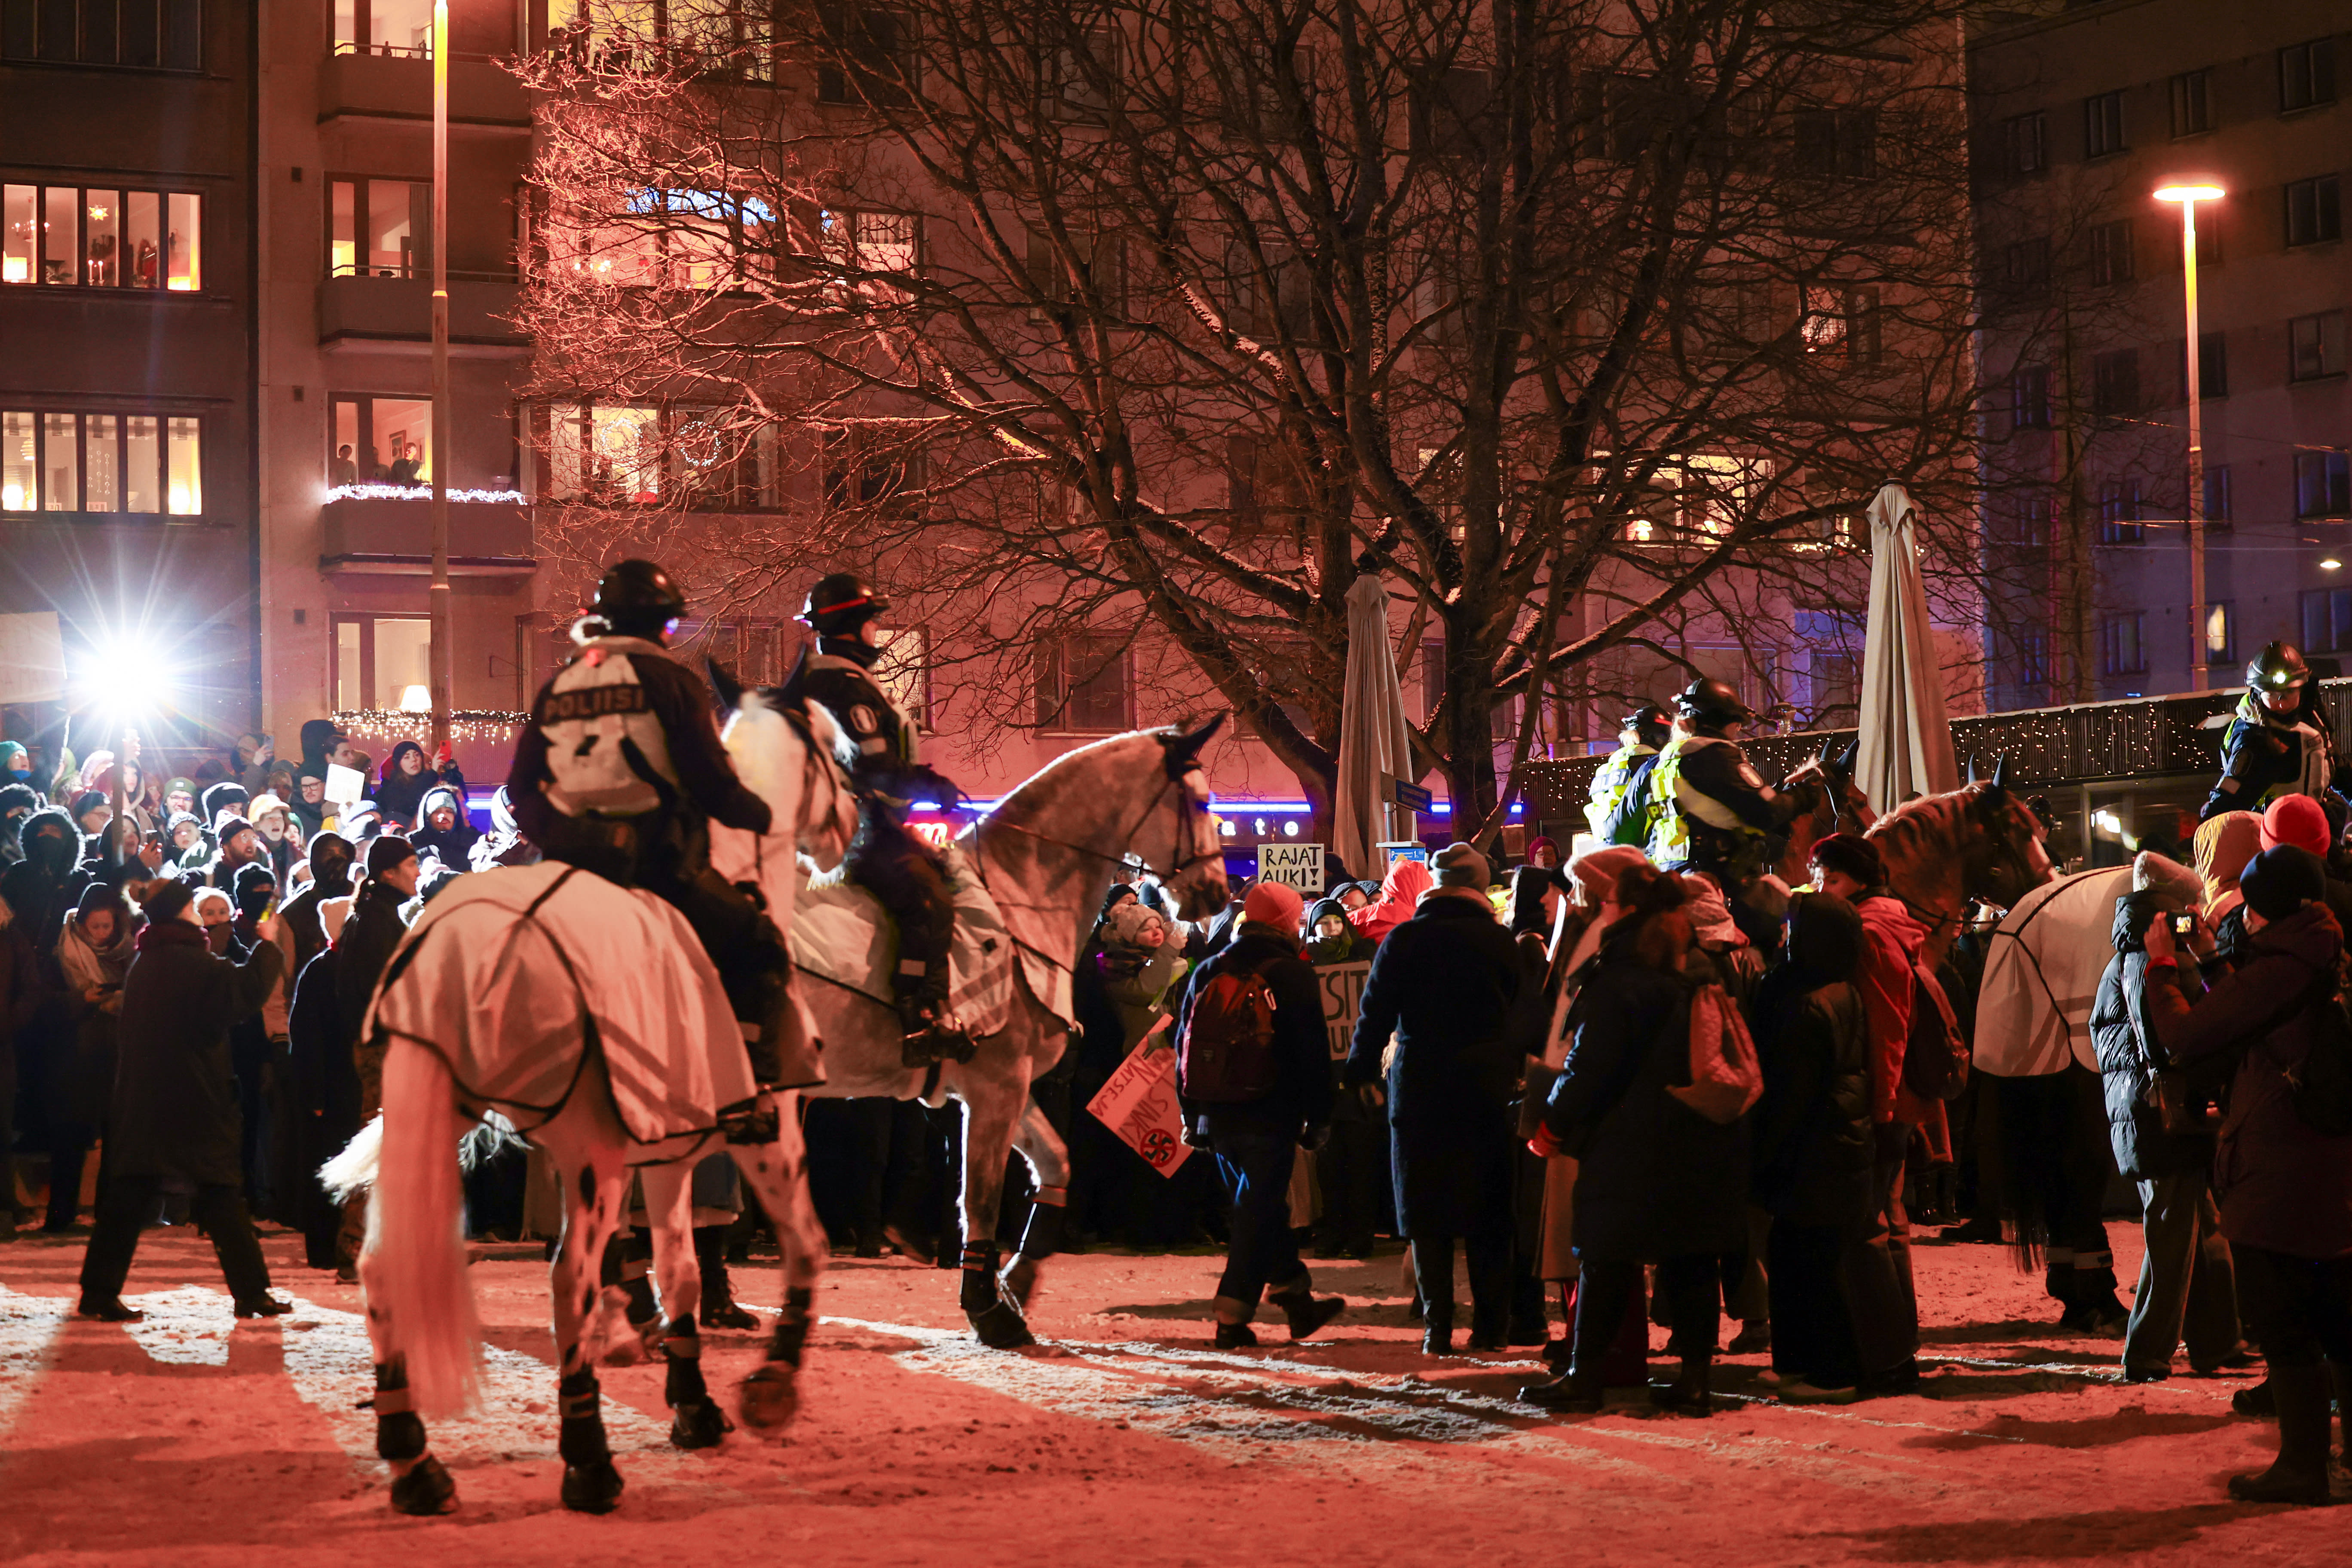 Protesters criticize the police for excessive use of force during the Helsinki demonstration